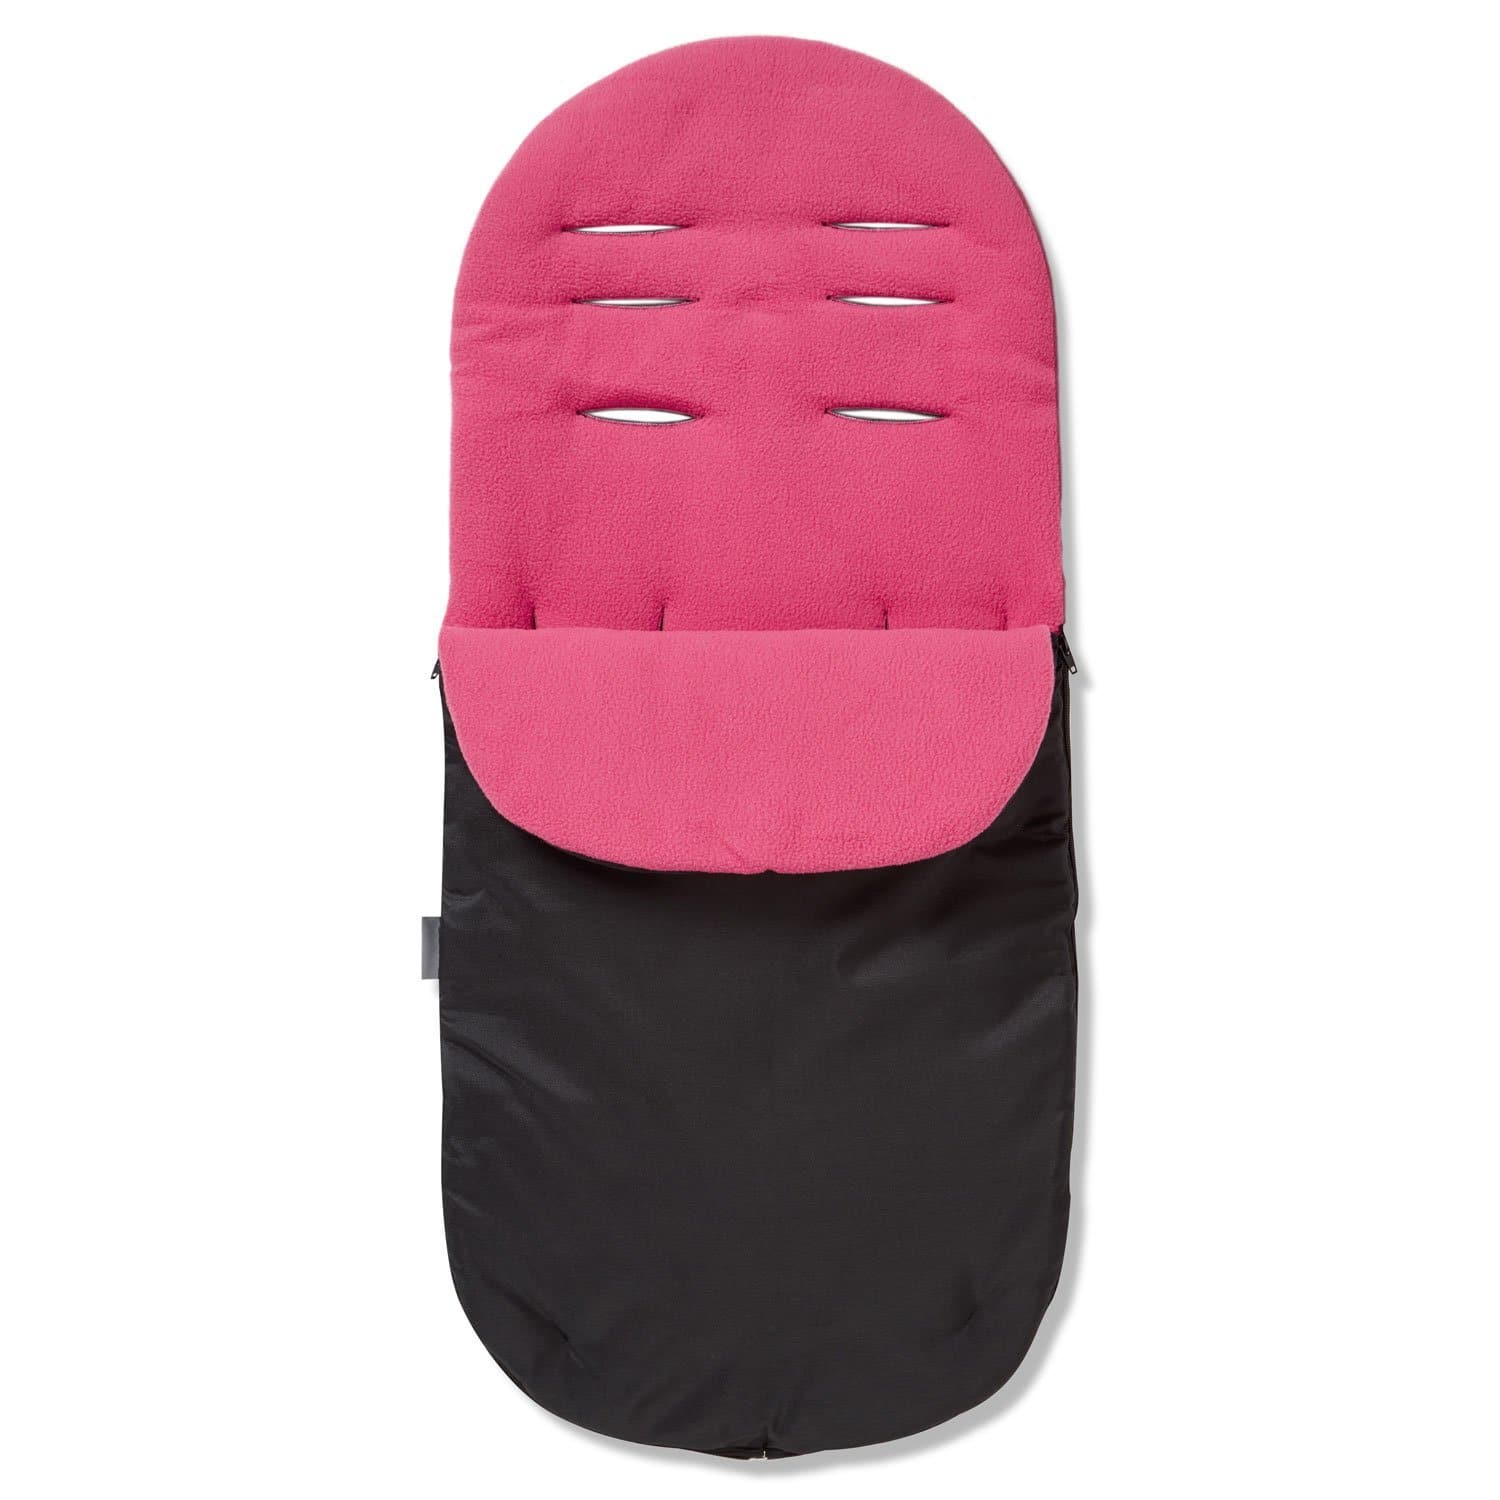 Footmuff / Cosy Toes Compatible with Infababy - Dark Pink / Fits All Models | For Your Little One